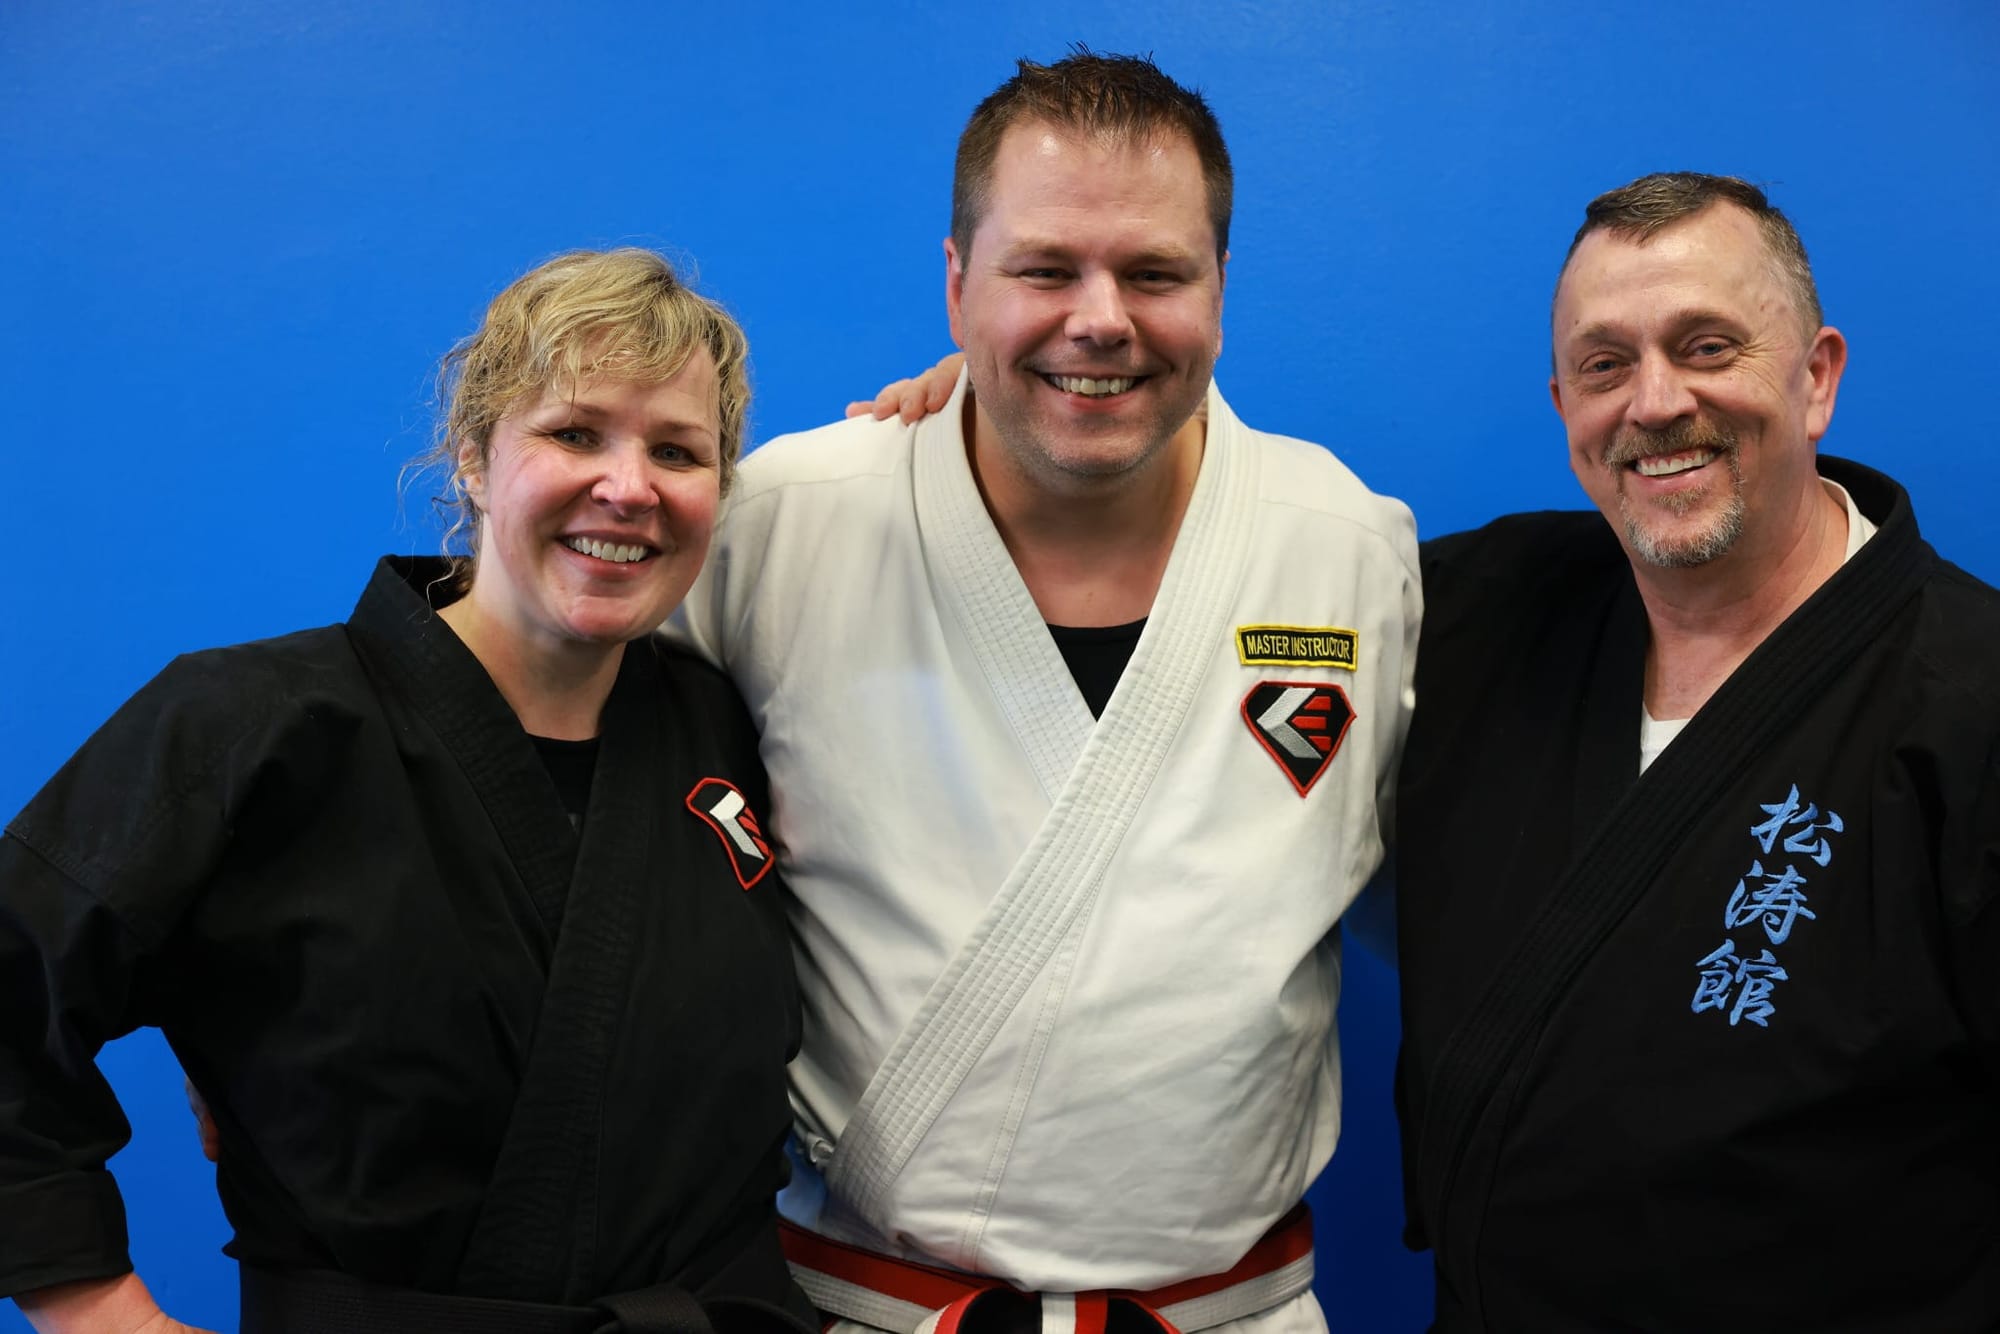 Anita Baillie and David Arnold Karate Edge Black Belt Test - Caution Over 100MB Post and YouTube Embeds